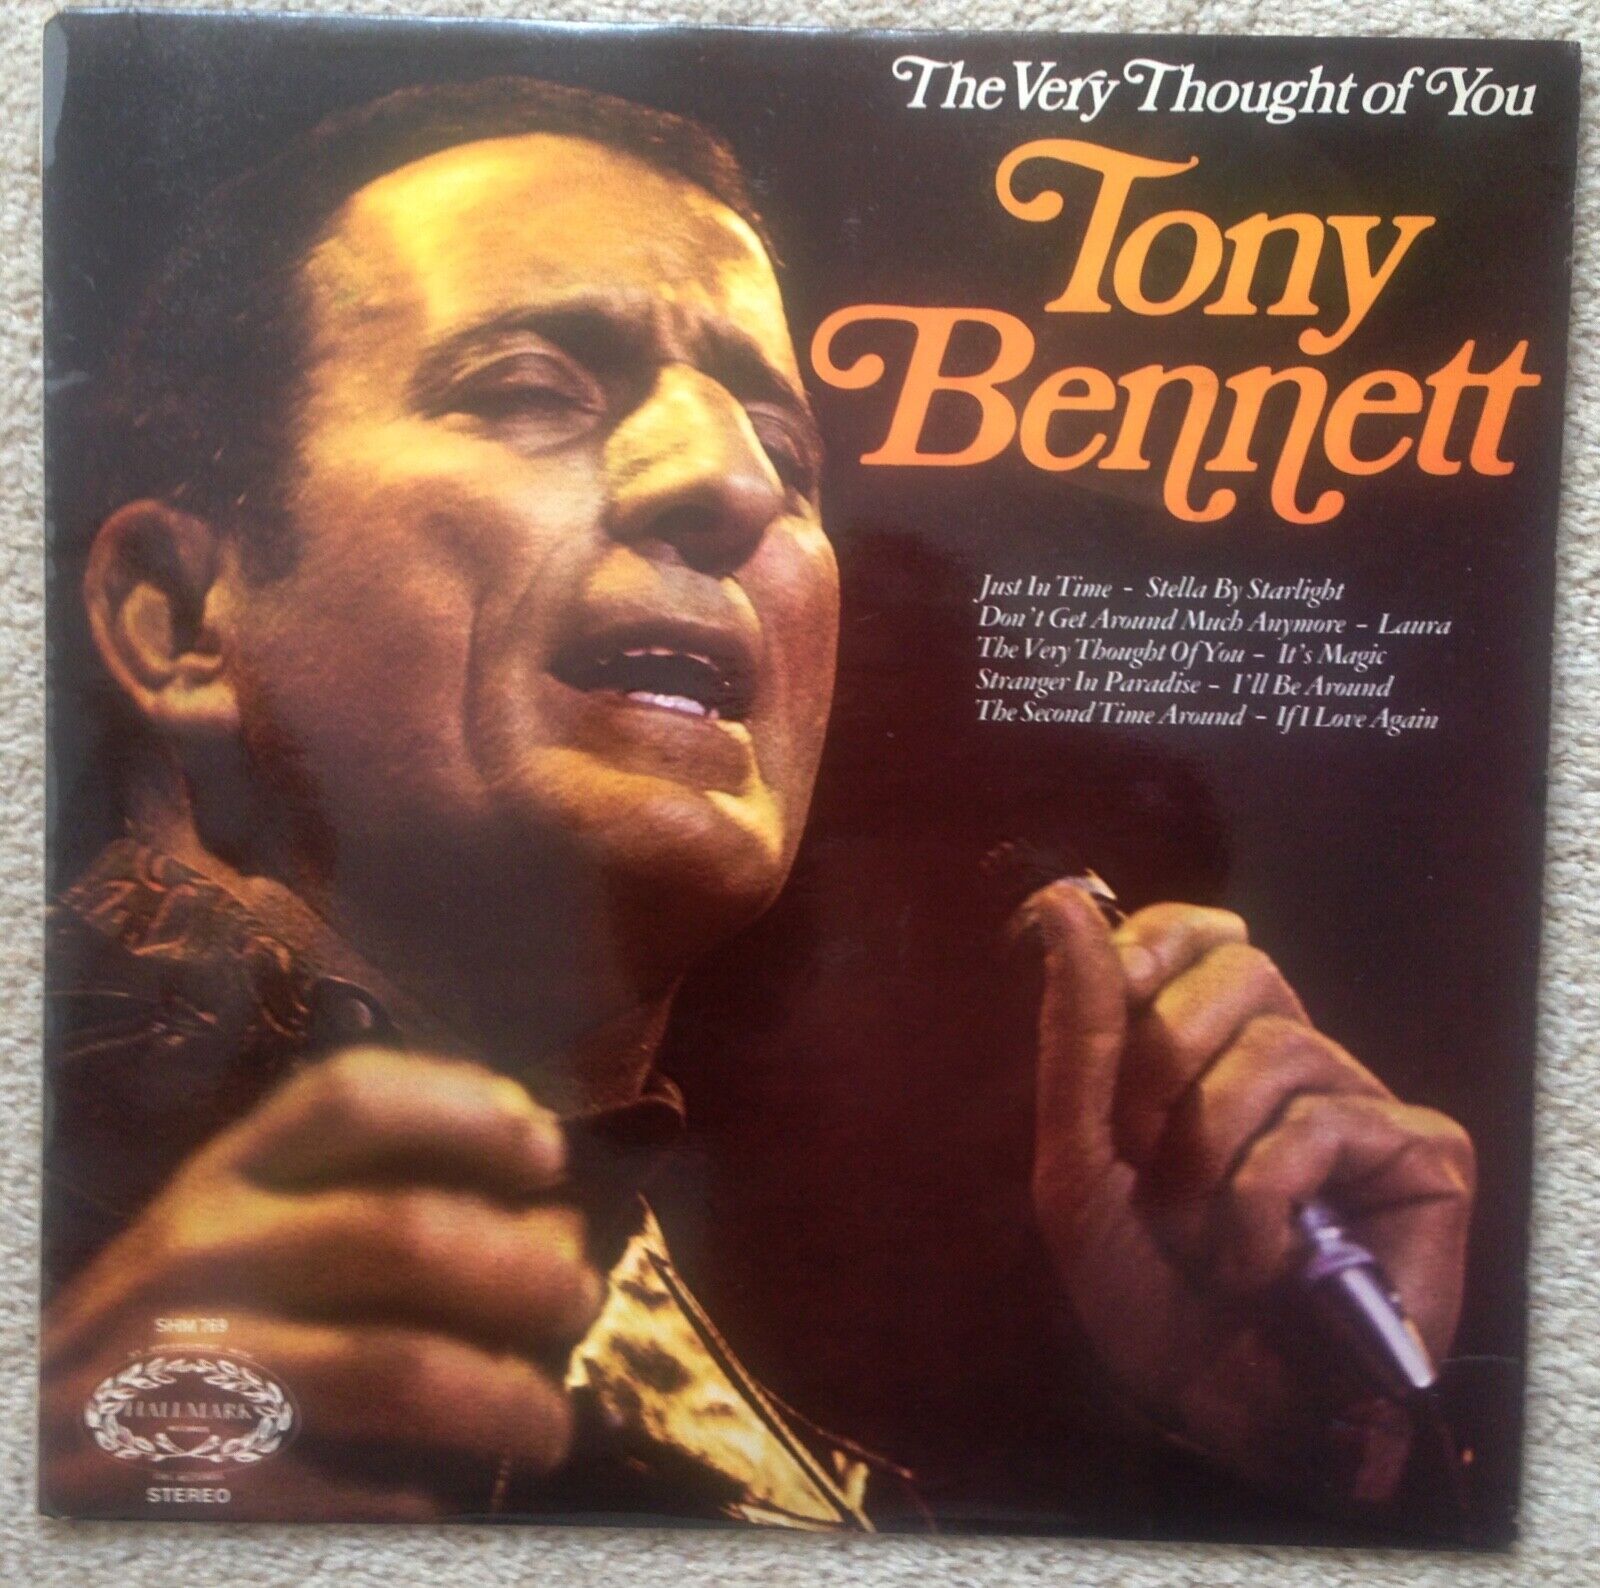 Tony Bennett - The Very Thought of You - 12" Vinyl LP (1967)